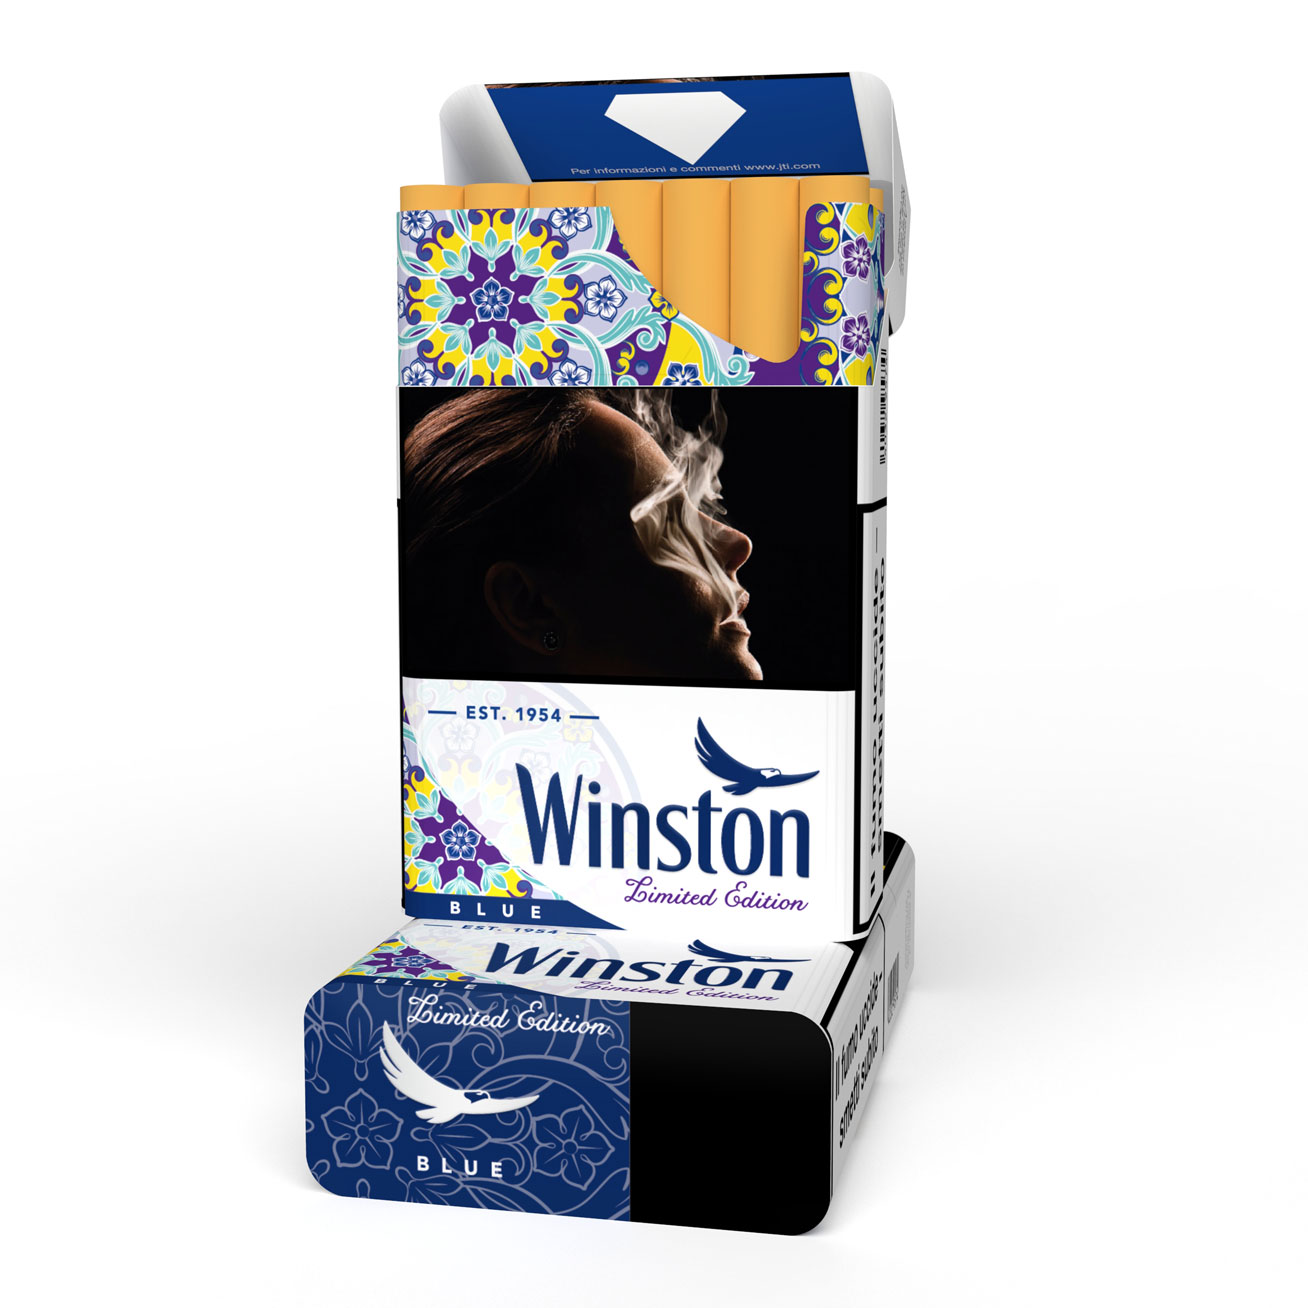 JTI_21_WINSTON_SICILY_PACK_LIMITED_EDITION_2